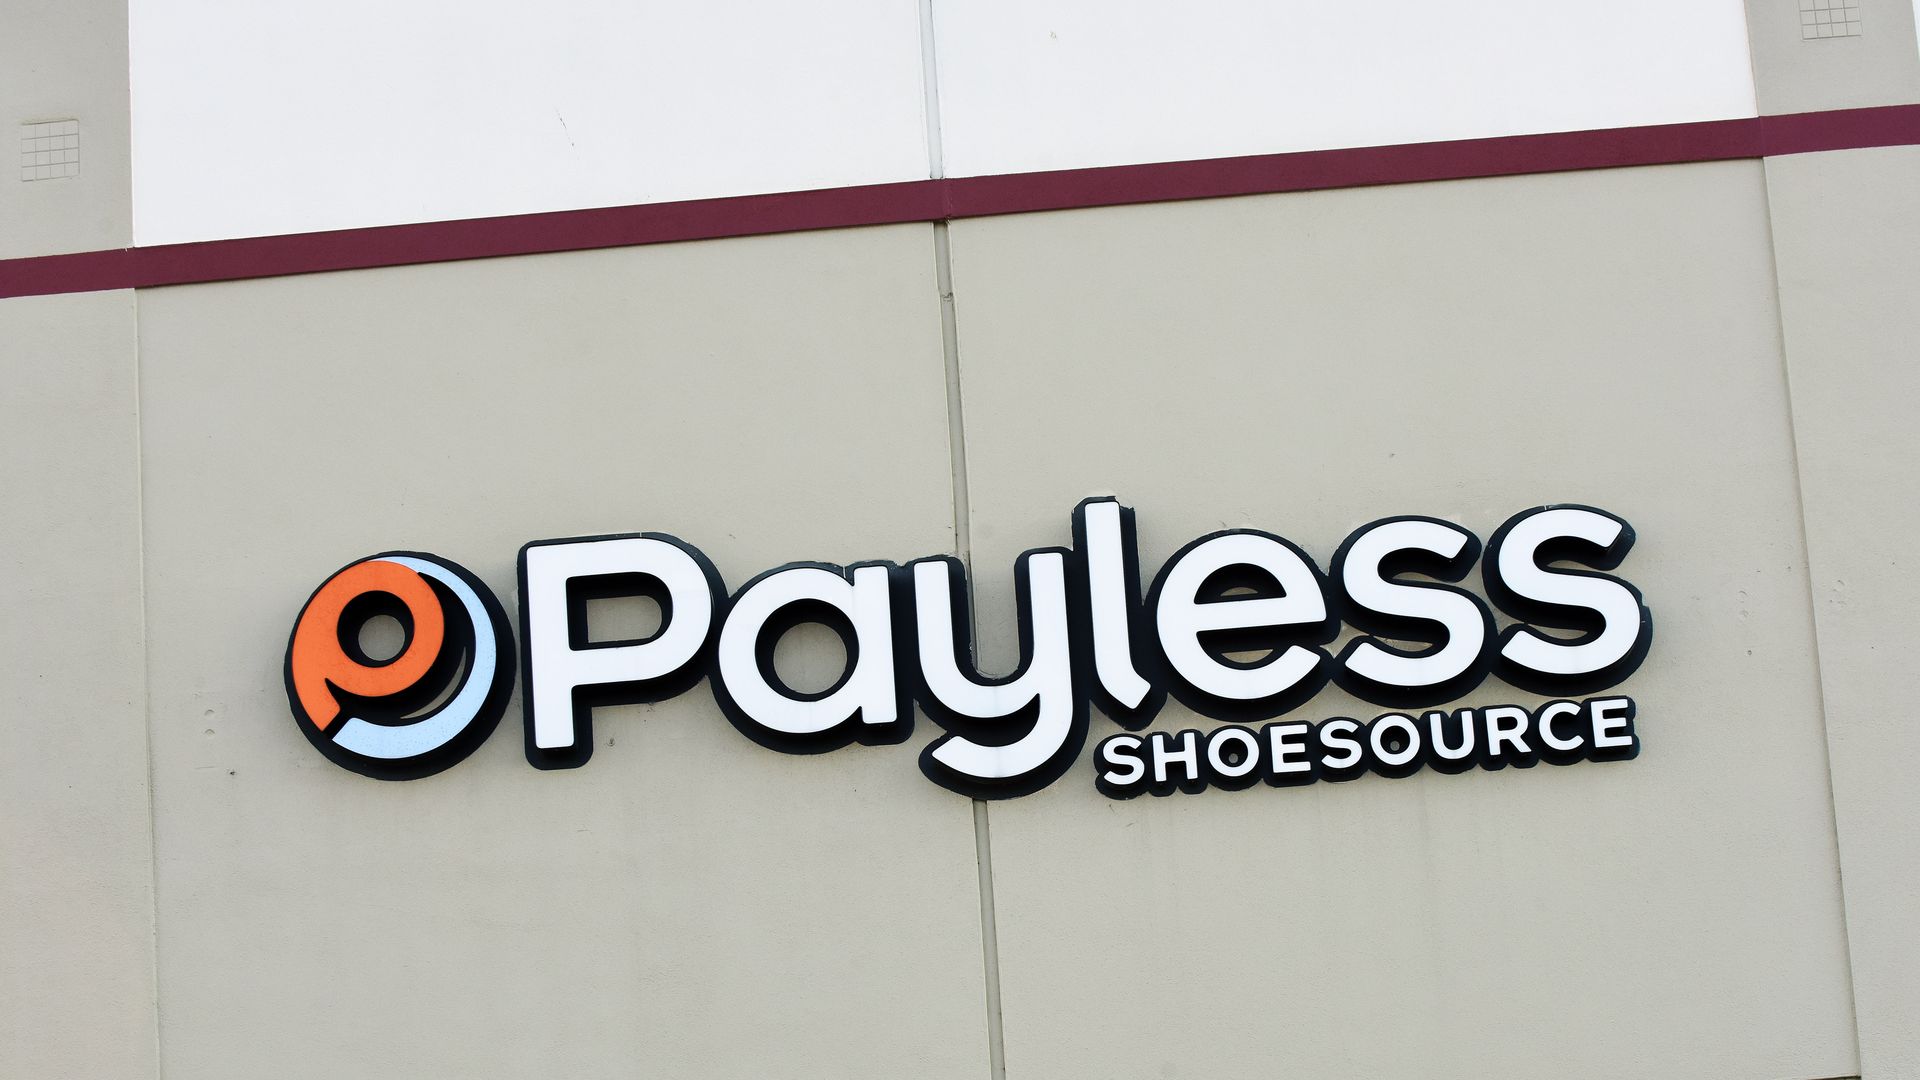 In this image, the orange and white storefront sign for Payless ShoeSource is visible against a beige concrete wall. 